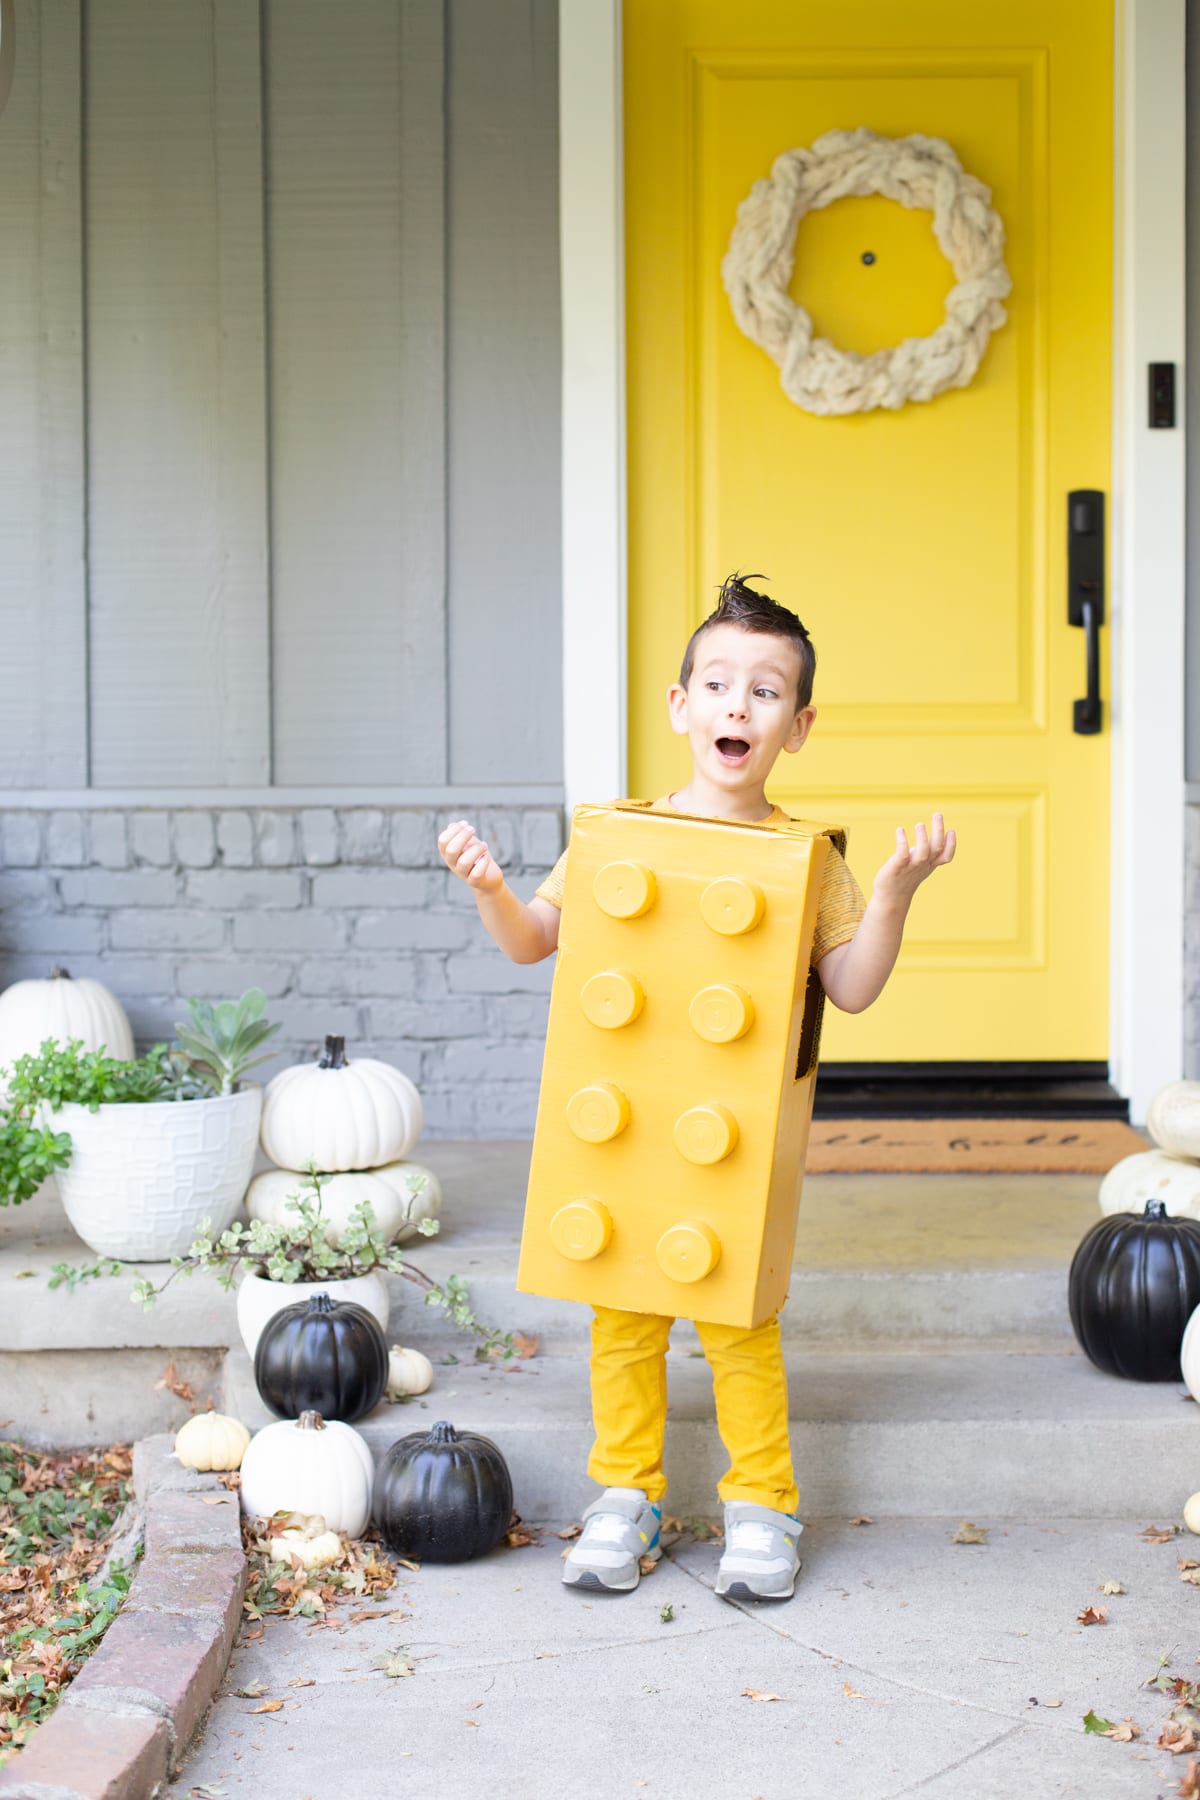 A little boy poses excitedly, wearing a DIY yellow LEGO block costume for trick-or-treating.